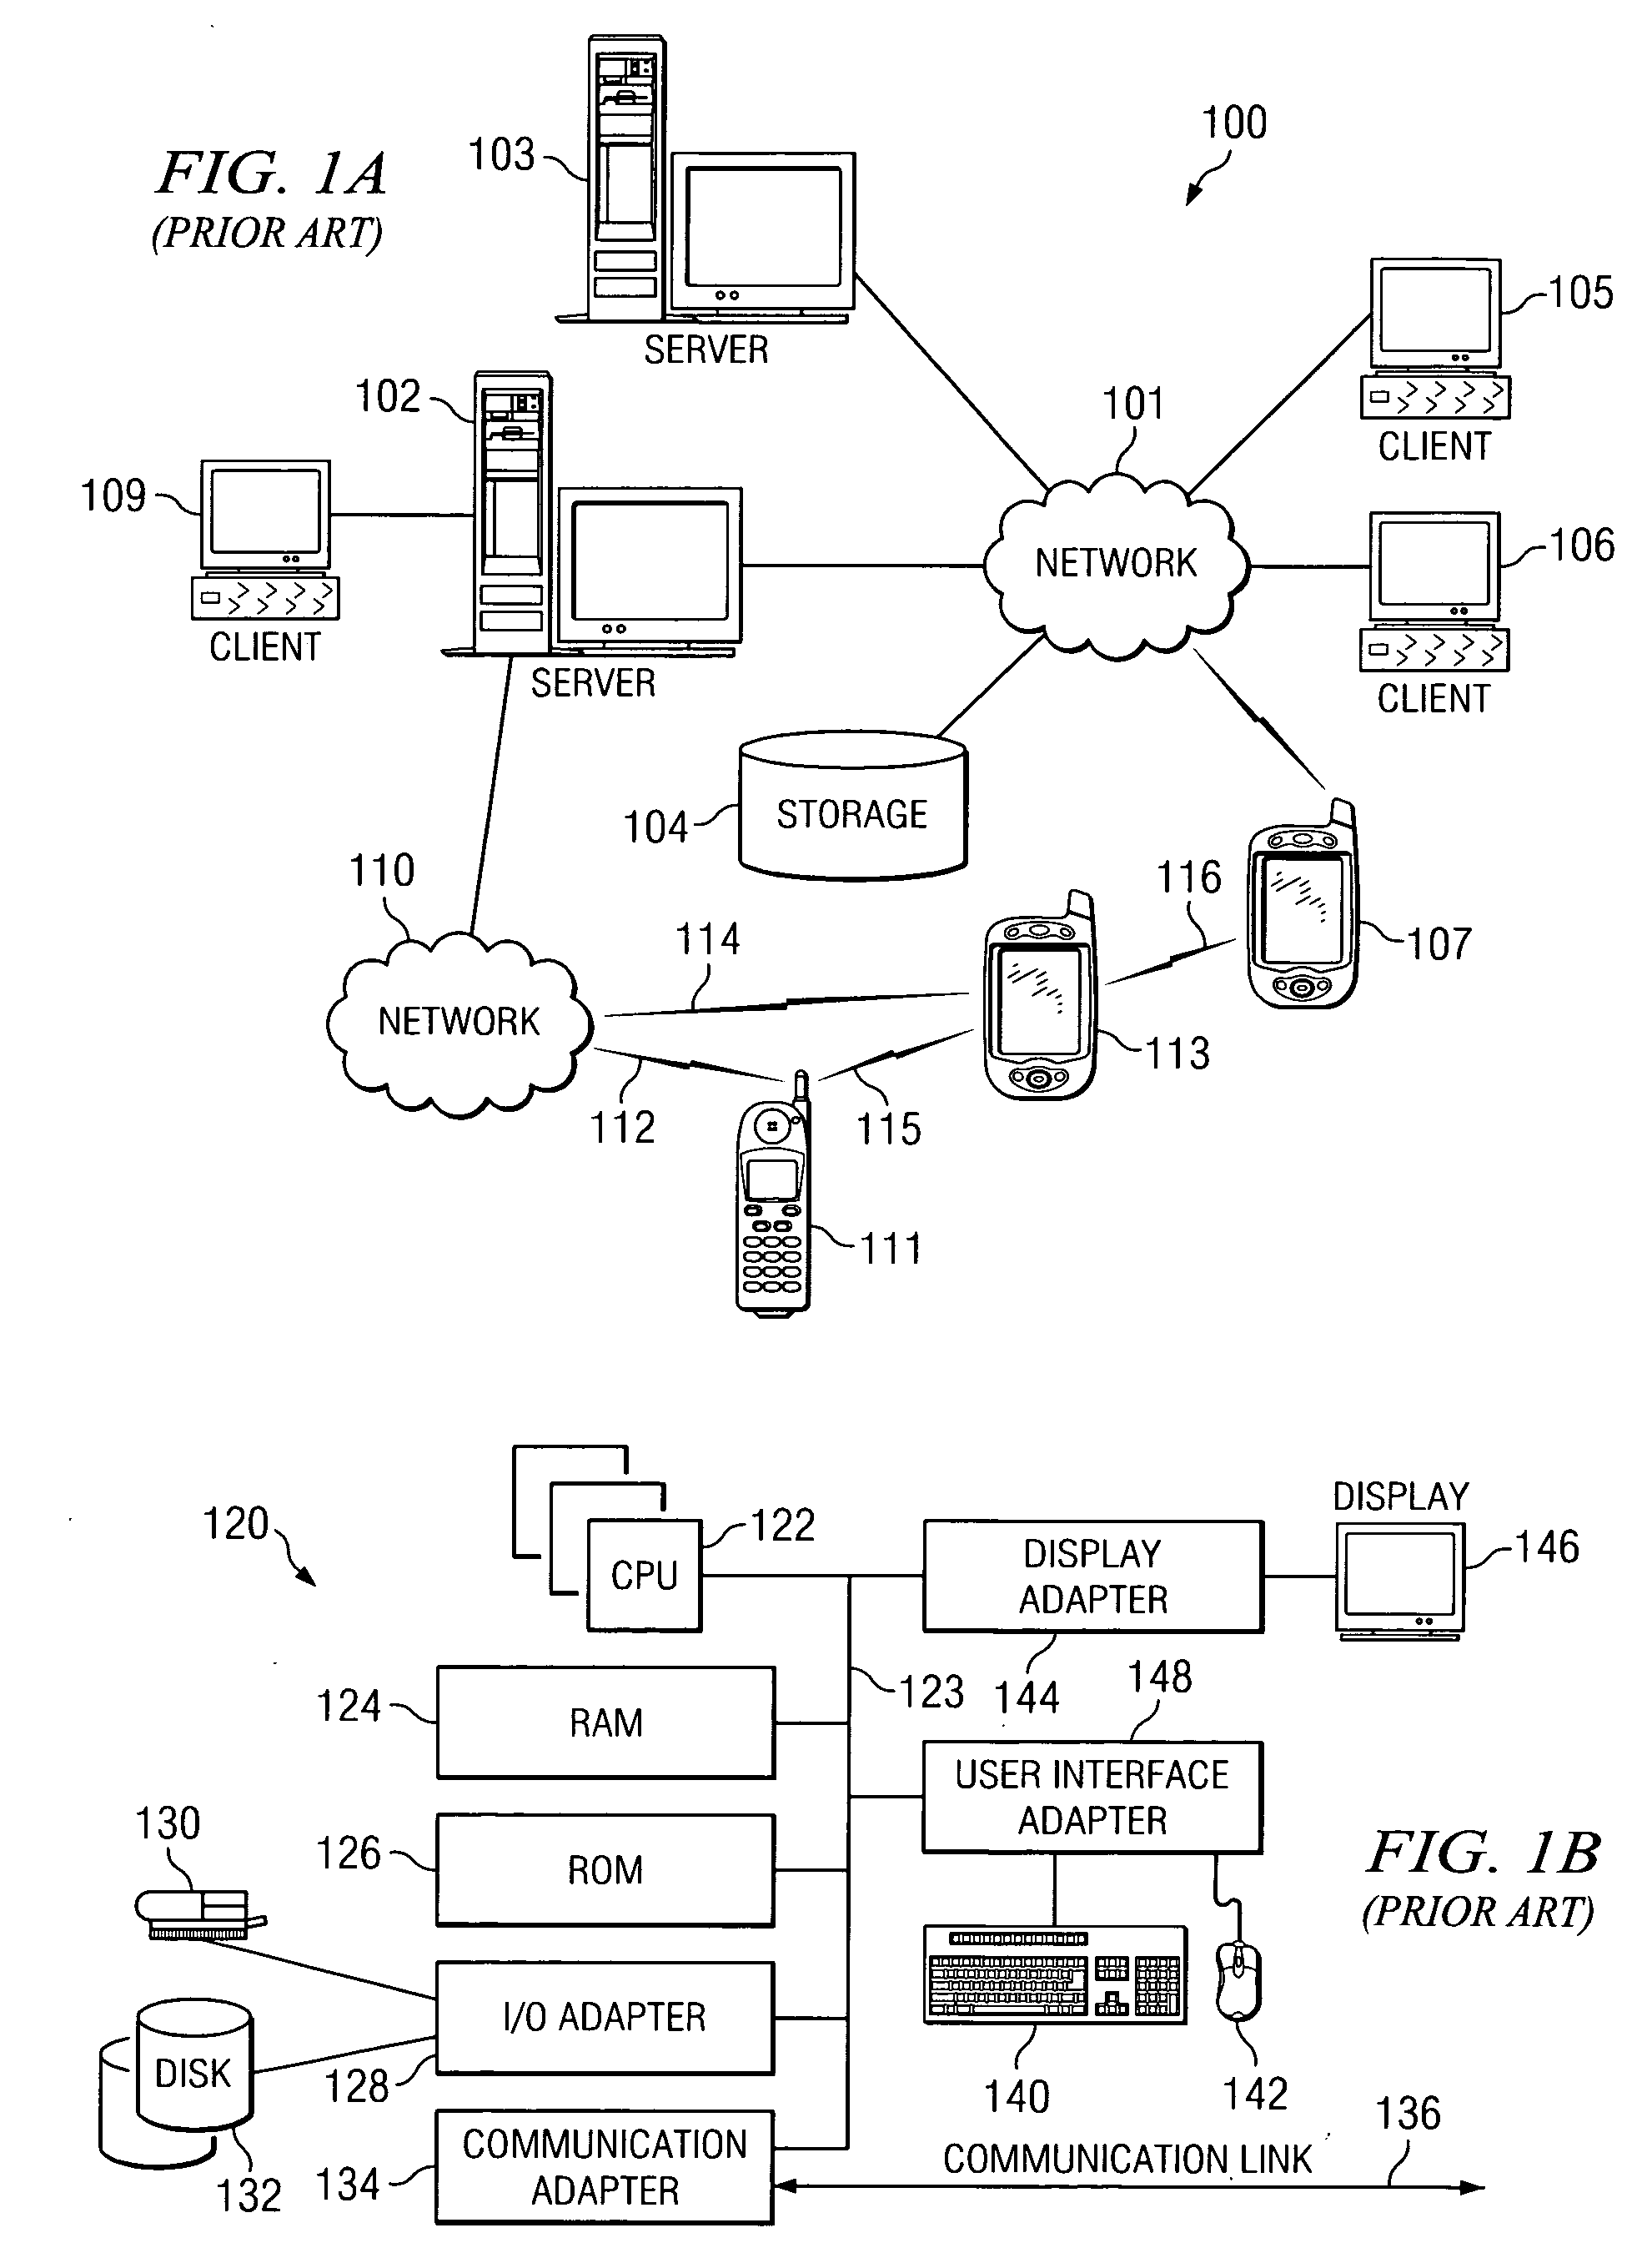 Method, apparatus, and product for establishing virtual endorsement credentials for dynamically generated endorsement keys in a trusted computing platform